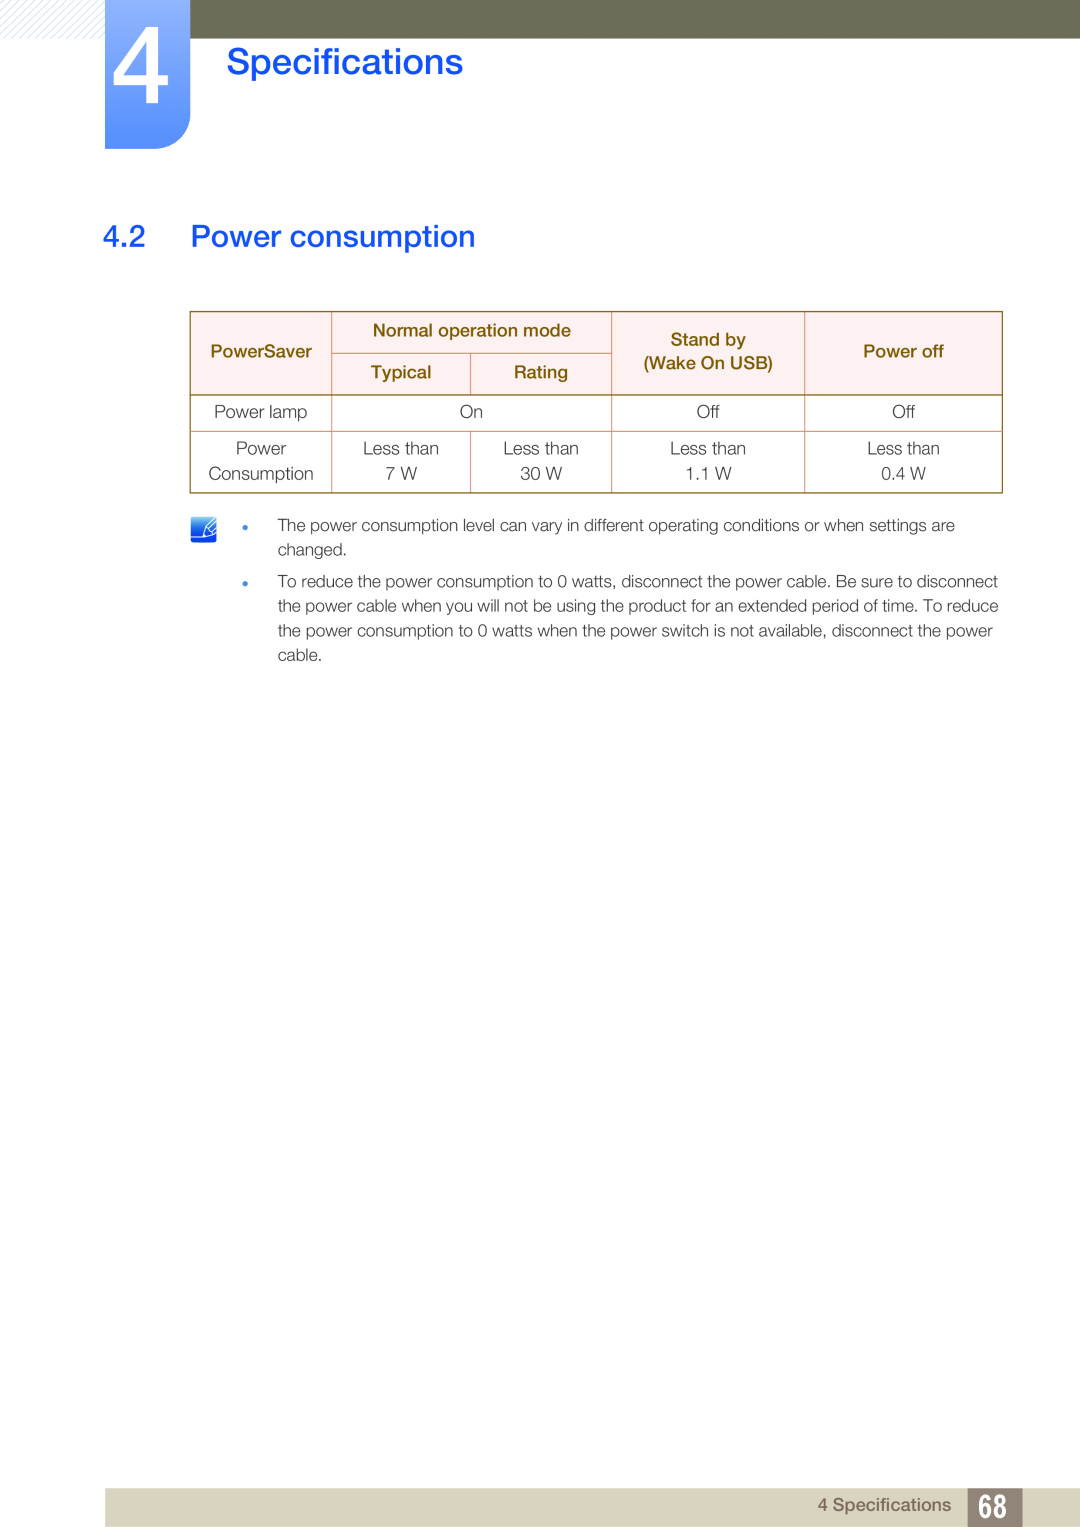 Samsung LF-NXN2N/XY Power consumption, Specifications, PowerSaver, Normal operation mode, Stand by, Power off, Typical 